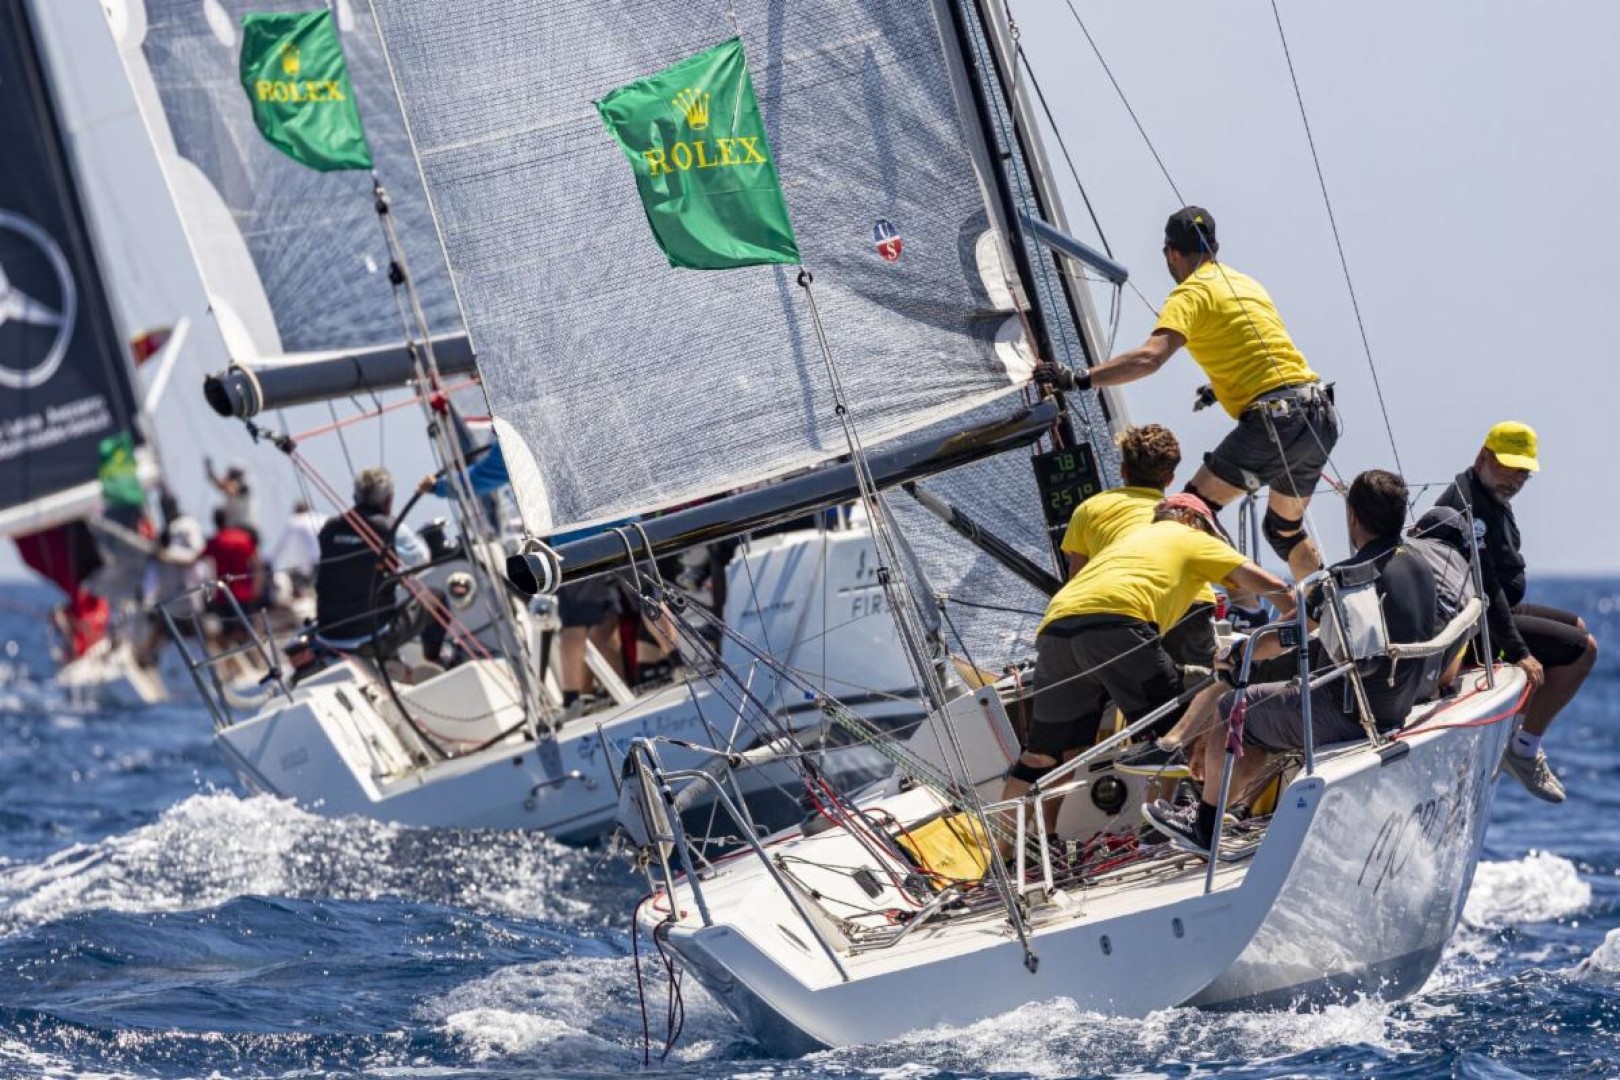 Less than one week to entry deadline for ORC Mediterranean Championship